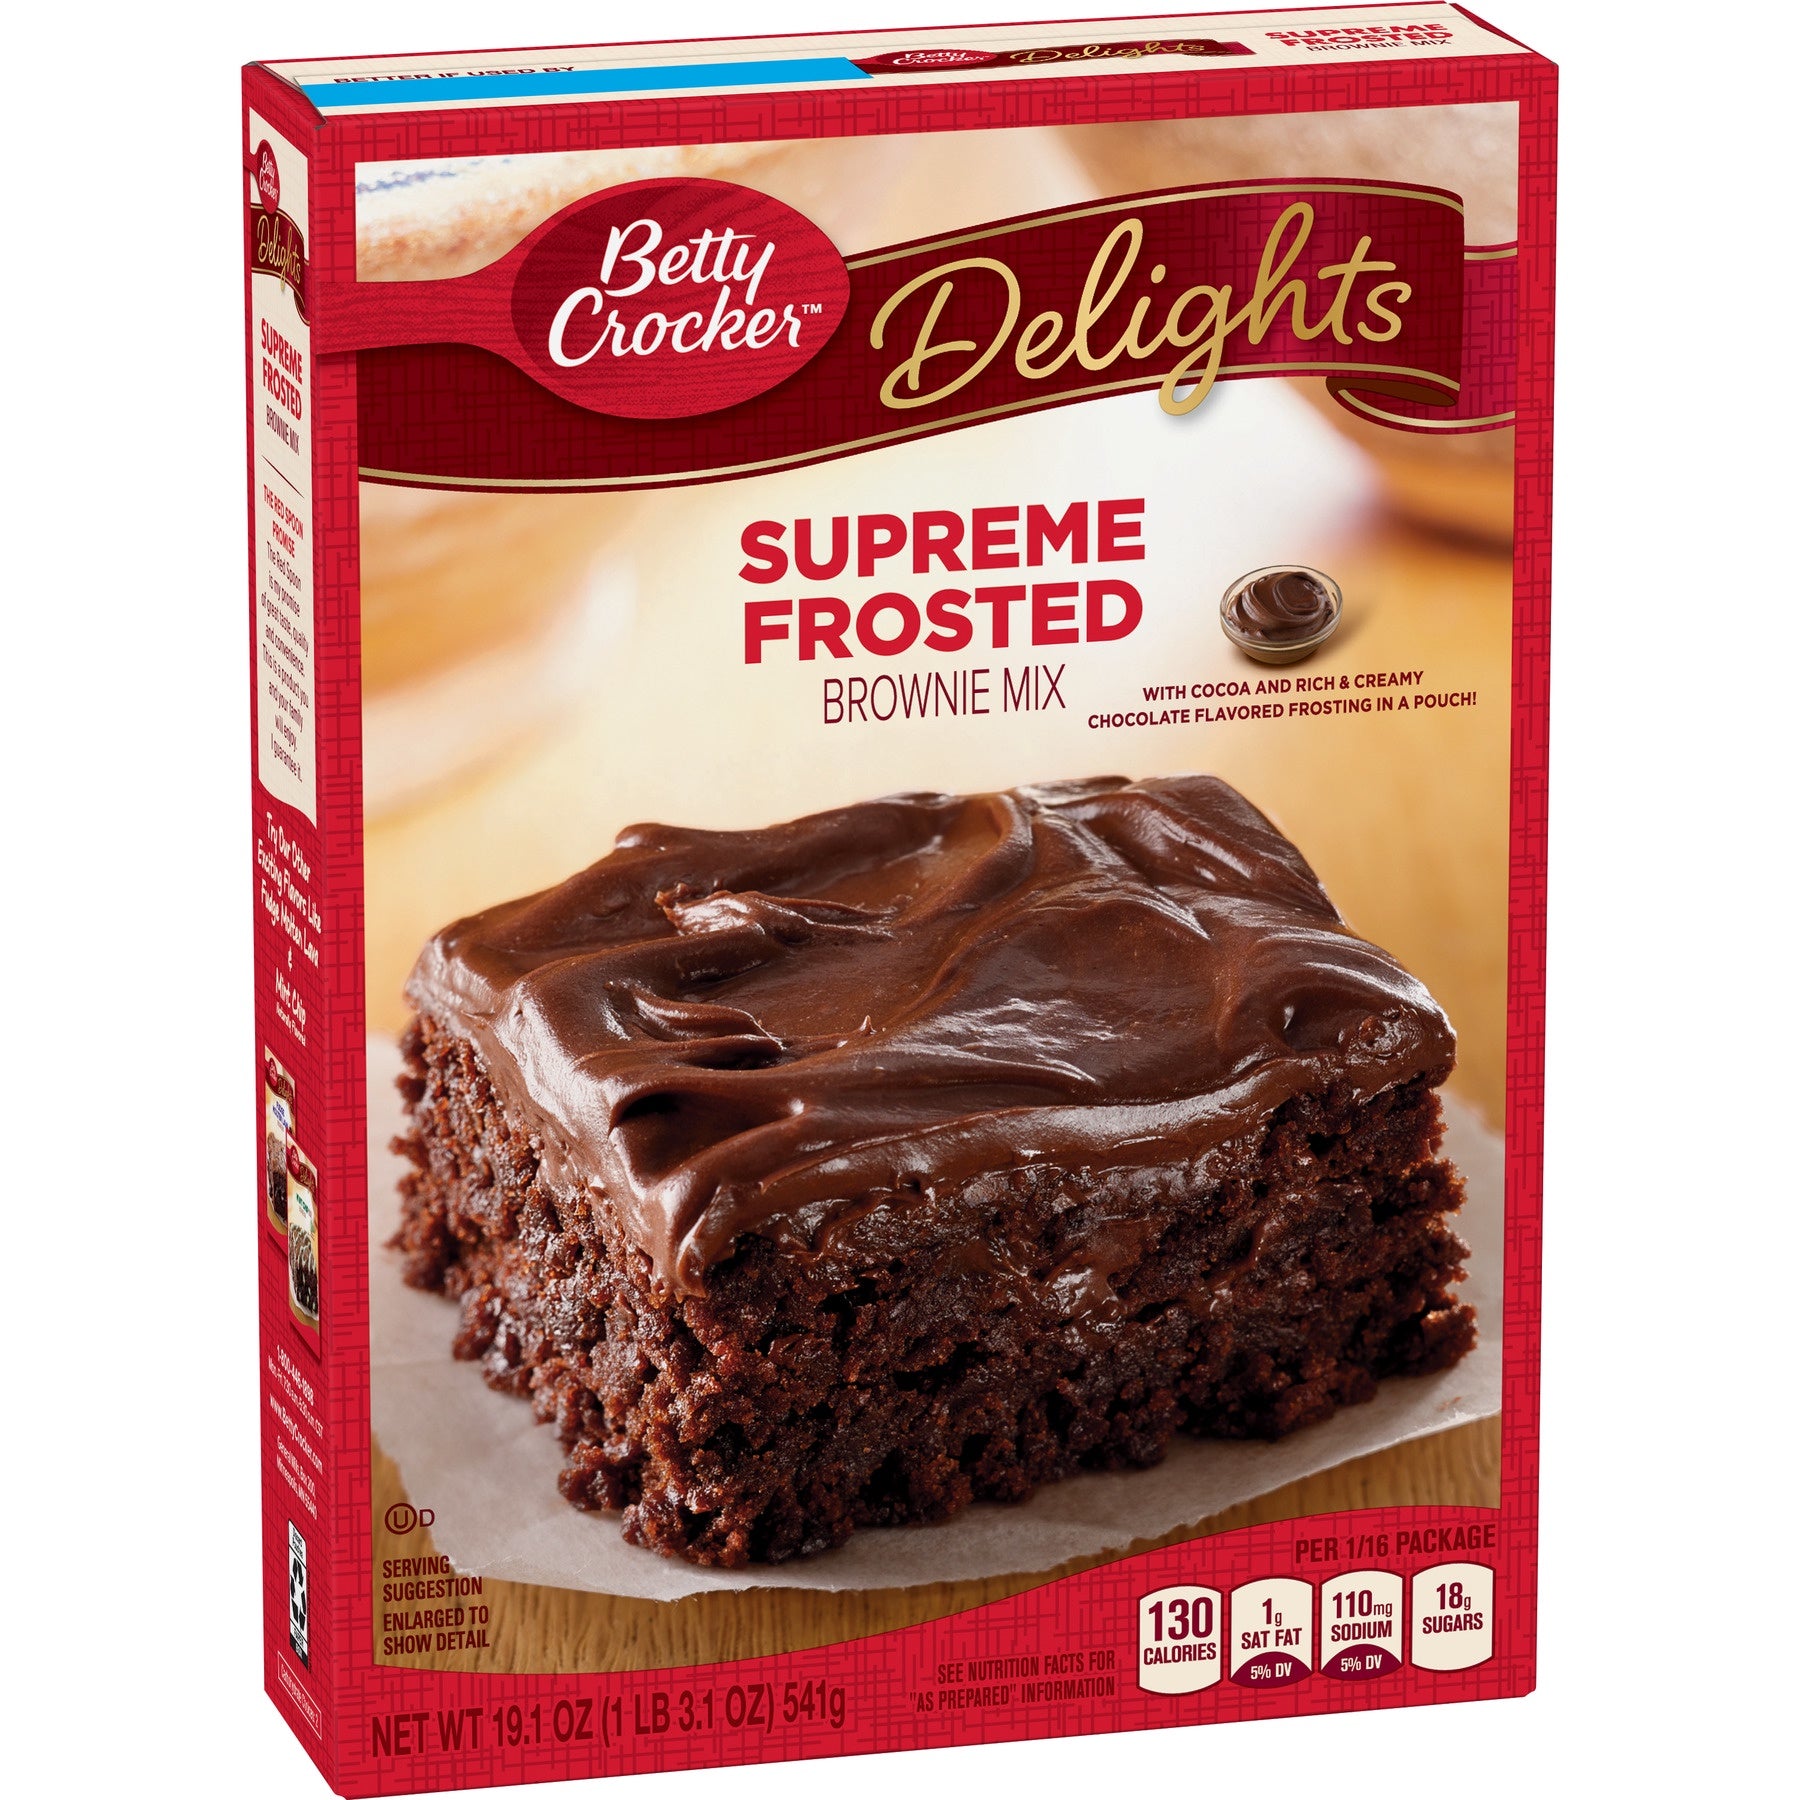 Betty Crocker Supreme Frosted Brownie Mix 19.1 oz